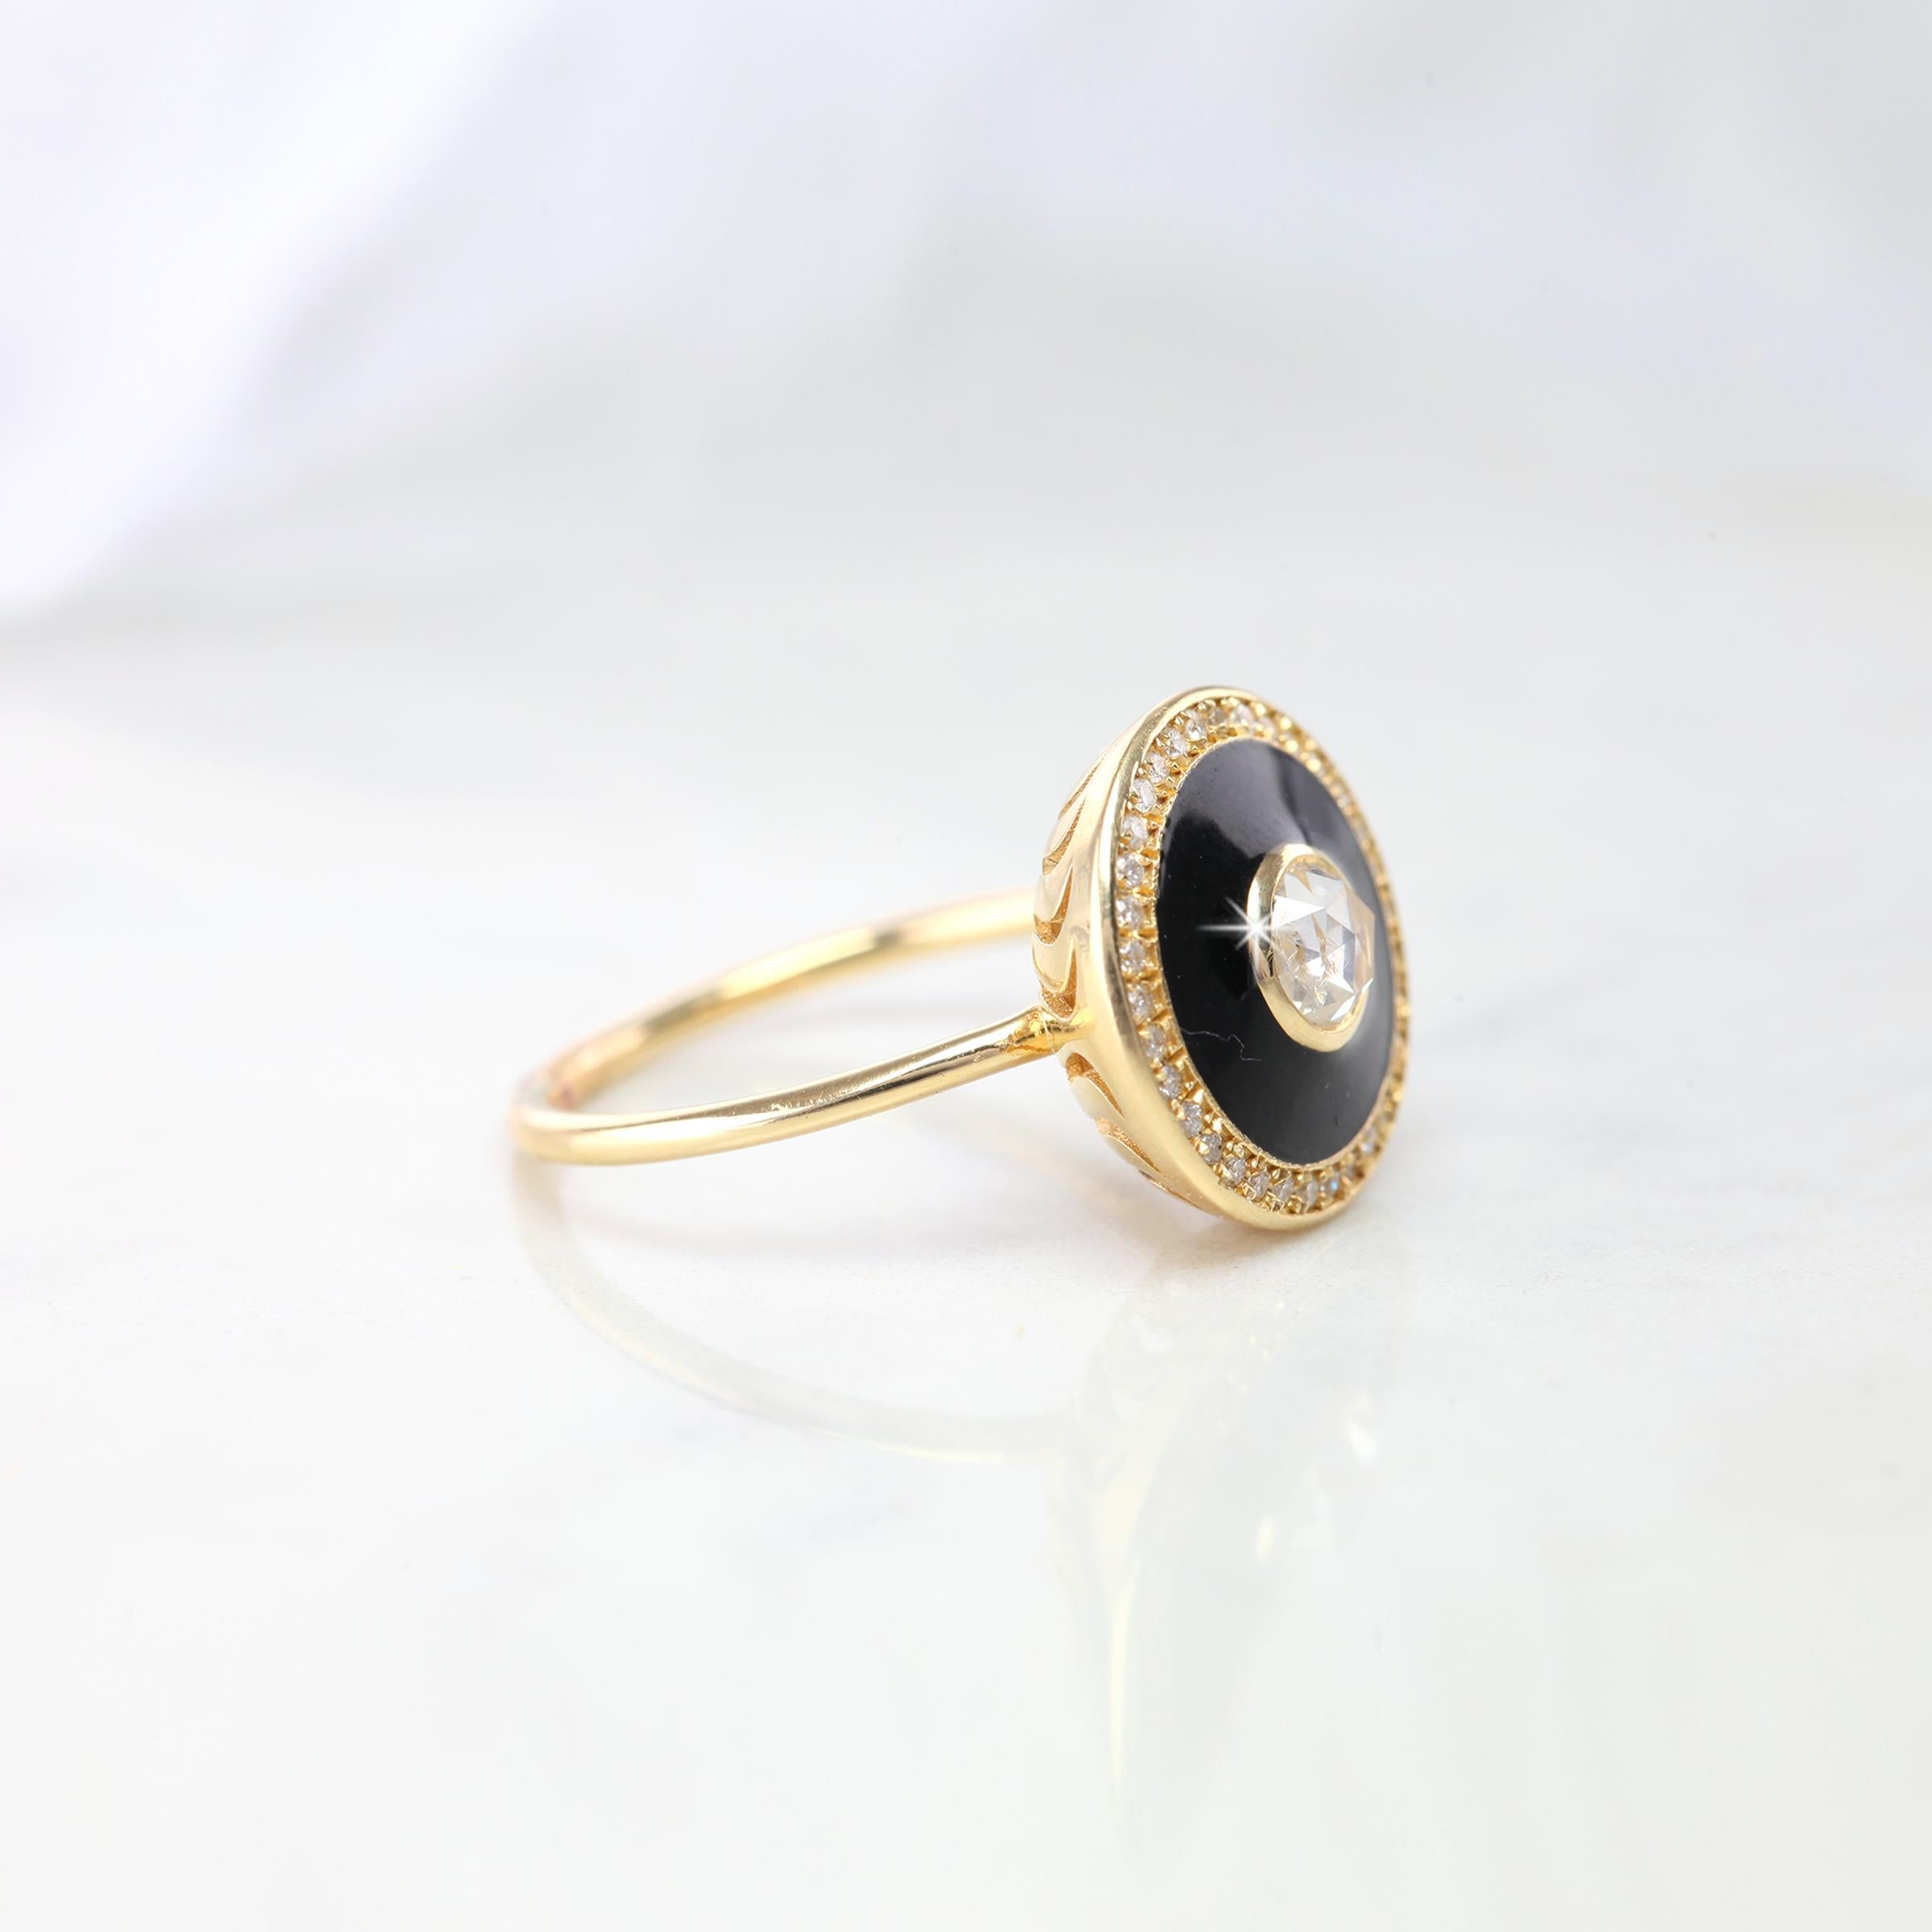 Artdeco Gold Ring, 14K Yellow Gold Artdeco Rosecut Diamond Ring, Artdeco Rosecut Black Enameled Yellow Gold Ring With Side Pave Setting created by hands from ring to the stone shapes.
I used brillant black enameled style to reveal a artdeco style